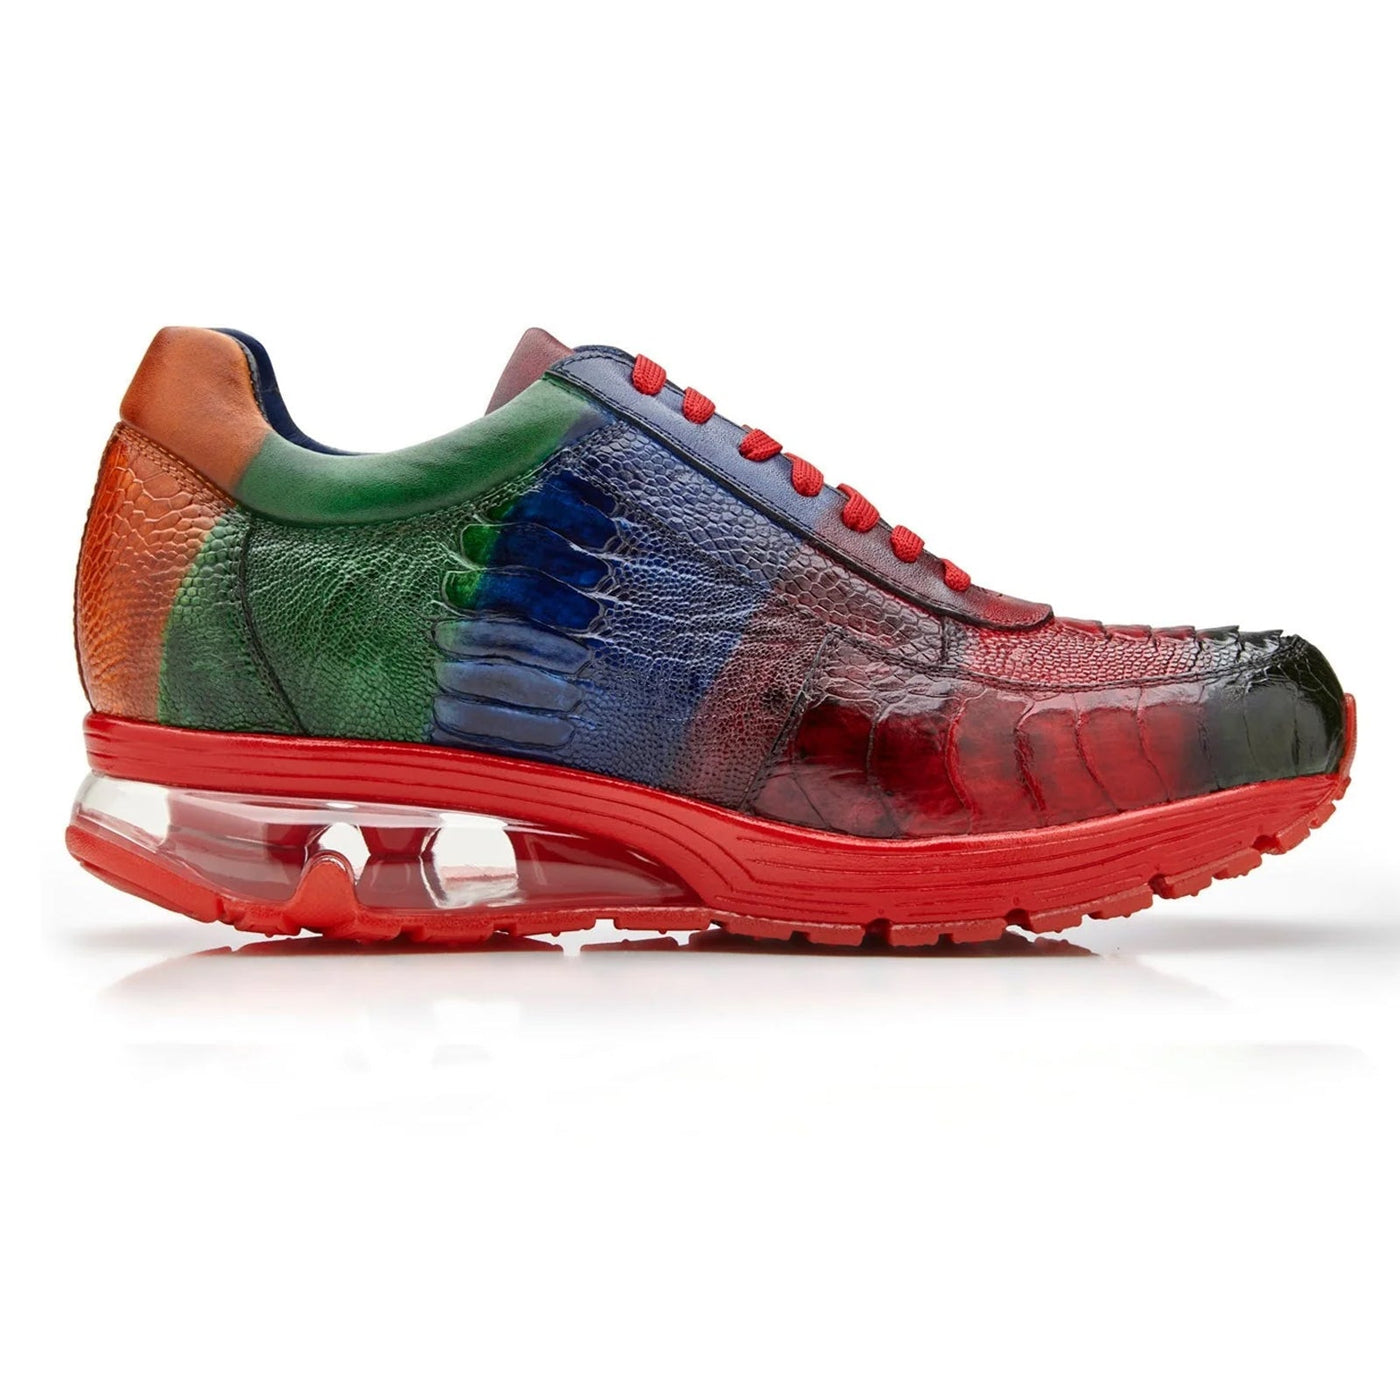 Men's Belvedere George Hand Painted Ostrich Leg Sneaker in Multi Color